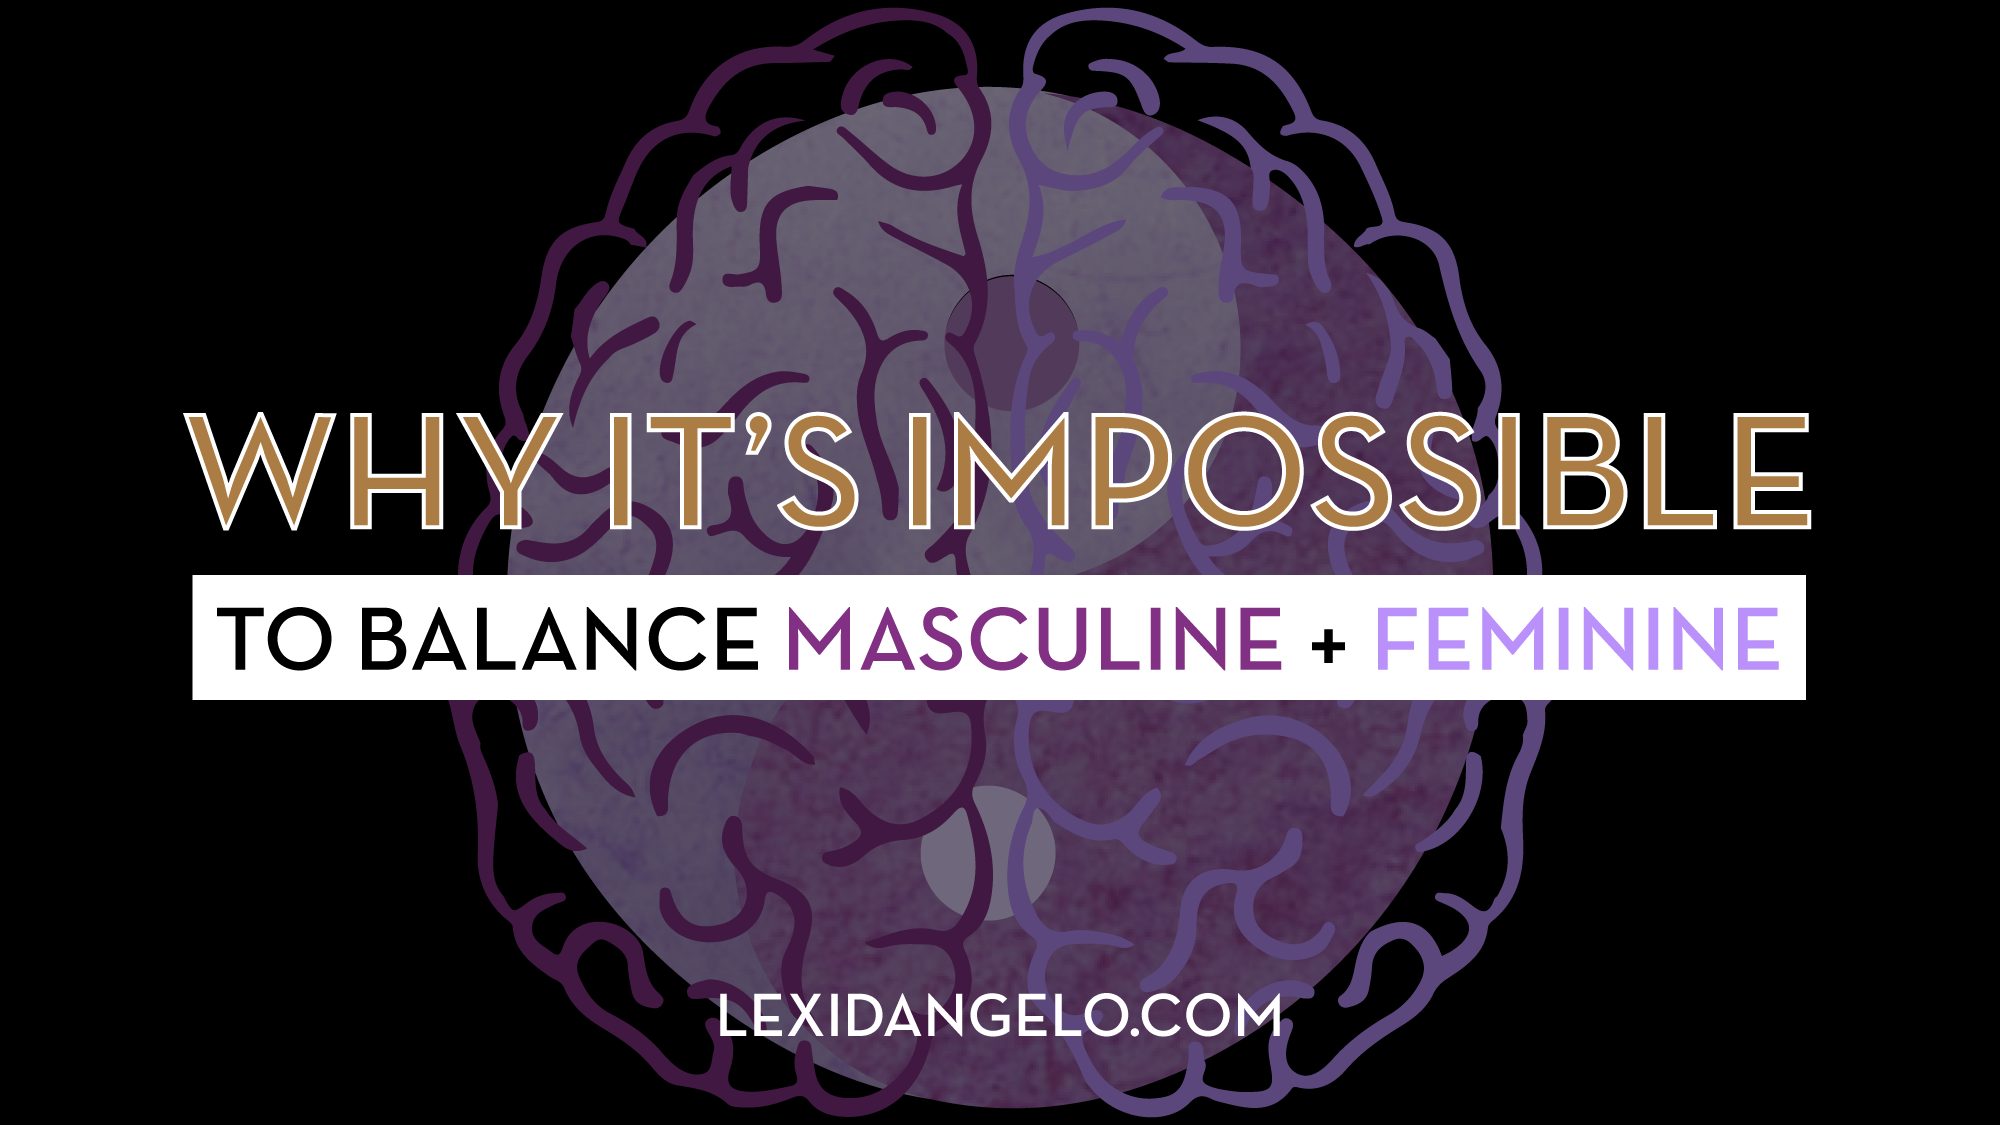 Why-It's-Impossible-to-Balance-Masculine-+-Feminine---Yin-Yang-Right-Left-Brain